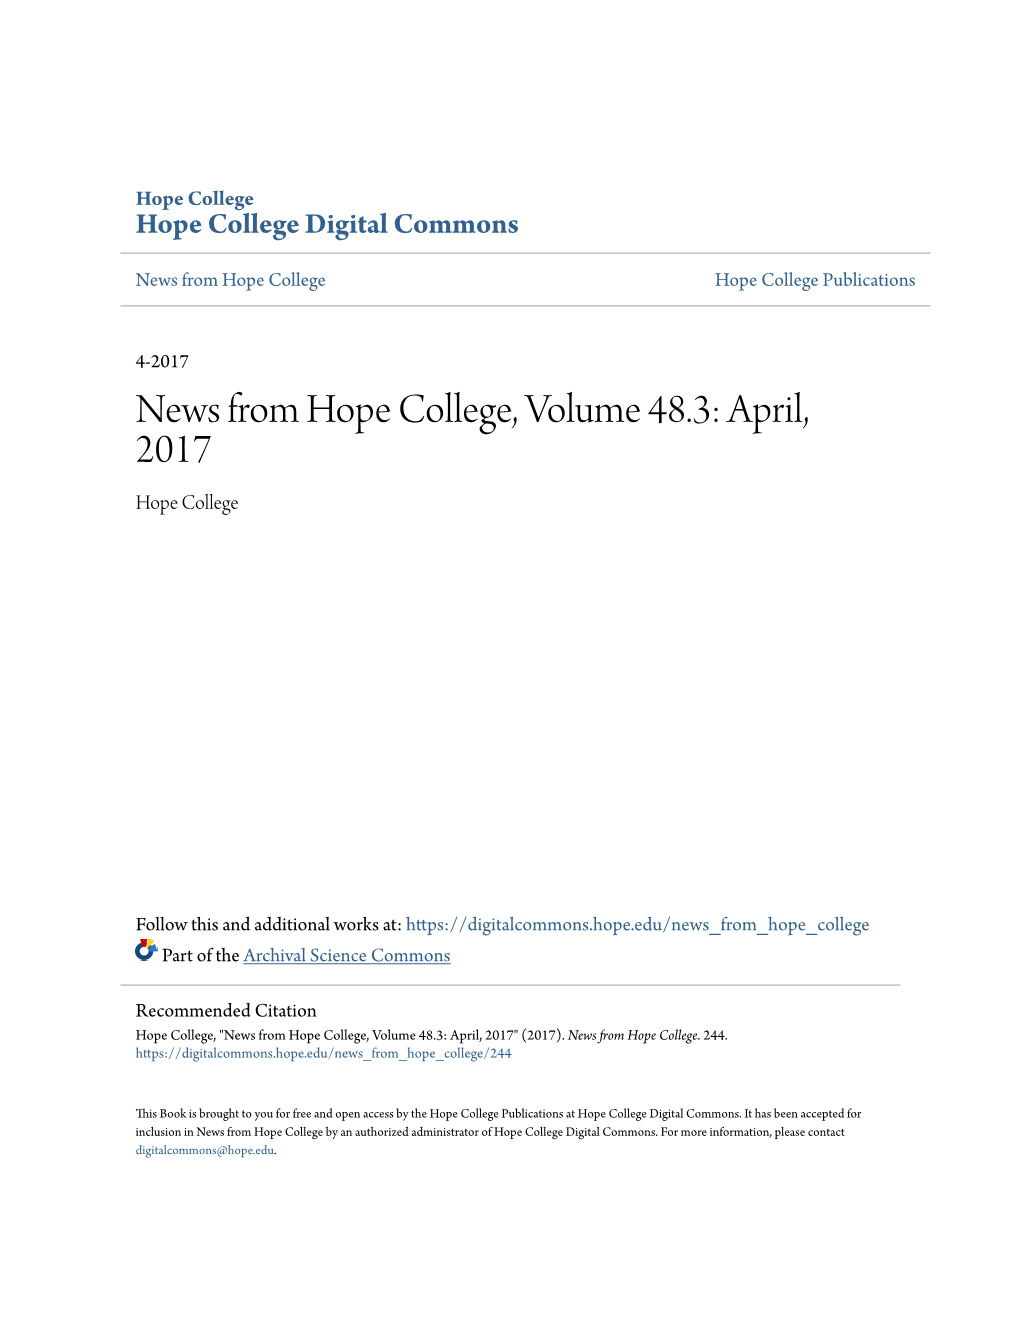 News from Hope College, Volume 48.3: April, 2017 Hope College